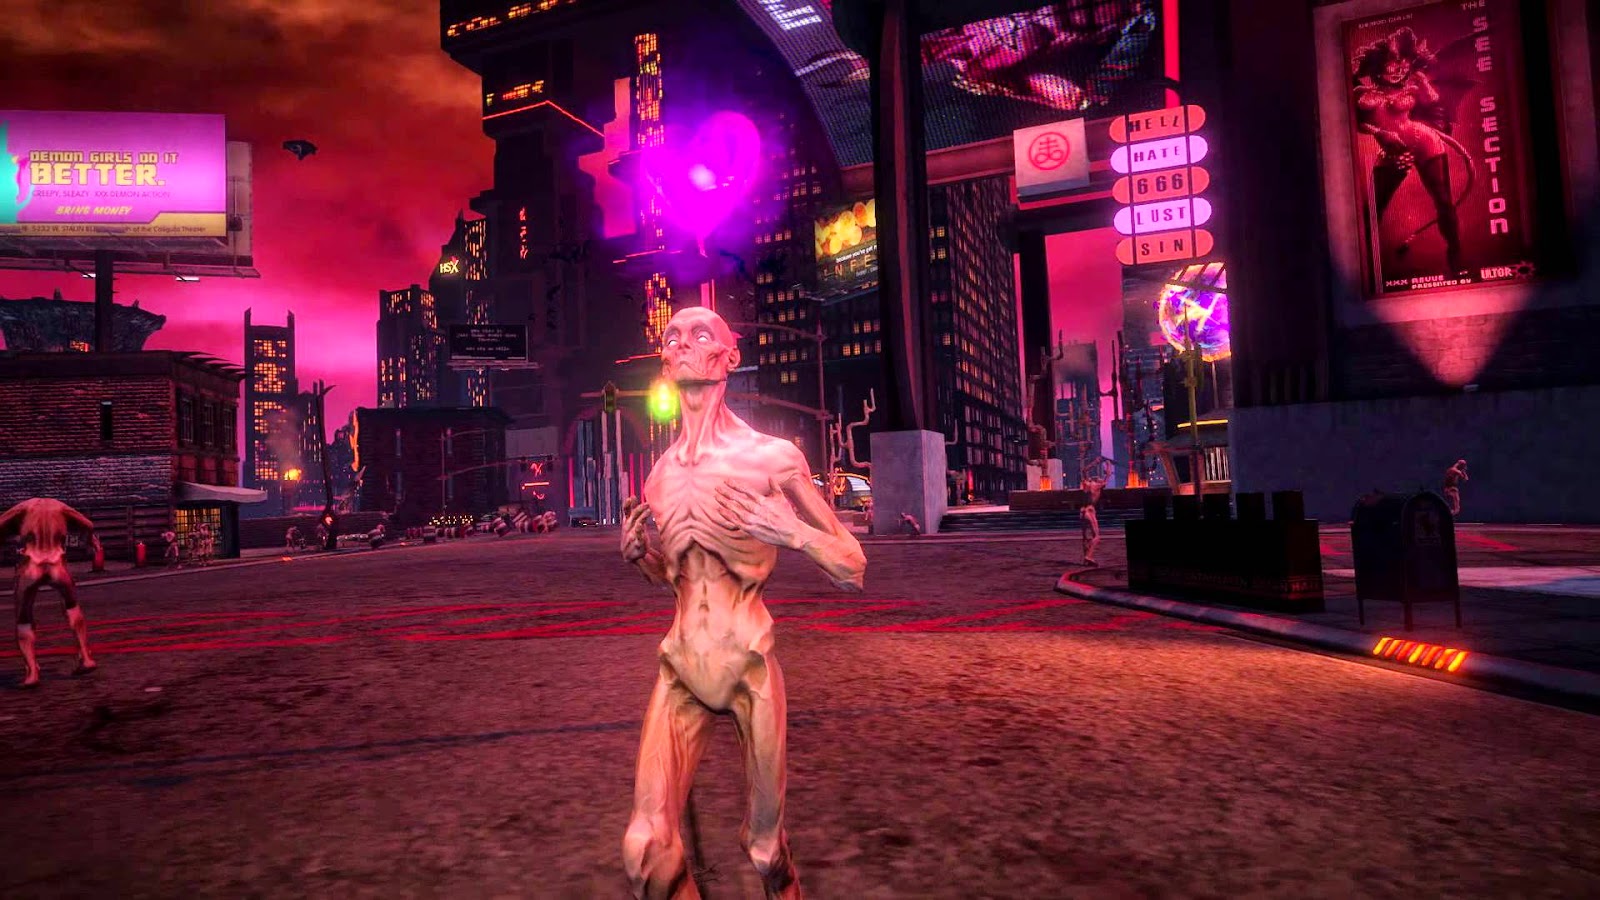 Saints Row: Gat Out of Hell Review (PS4)